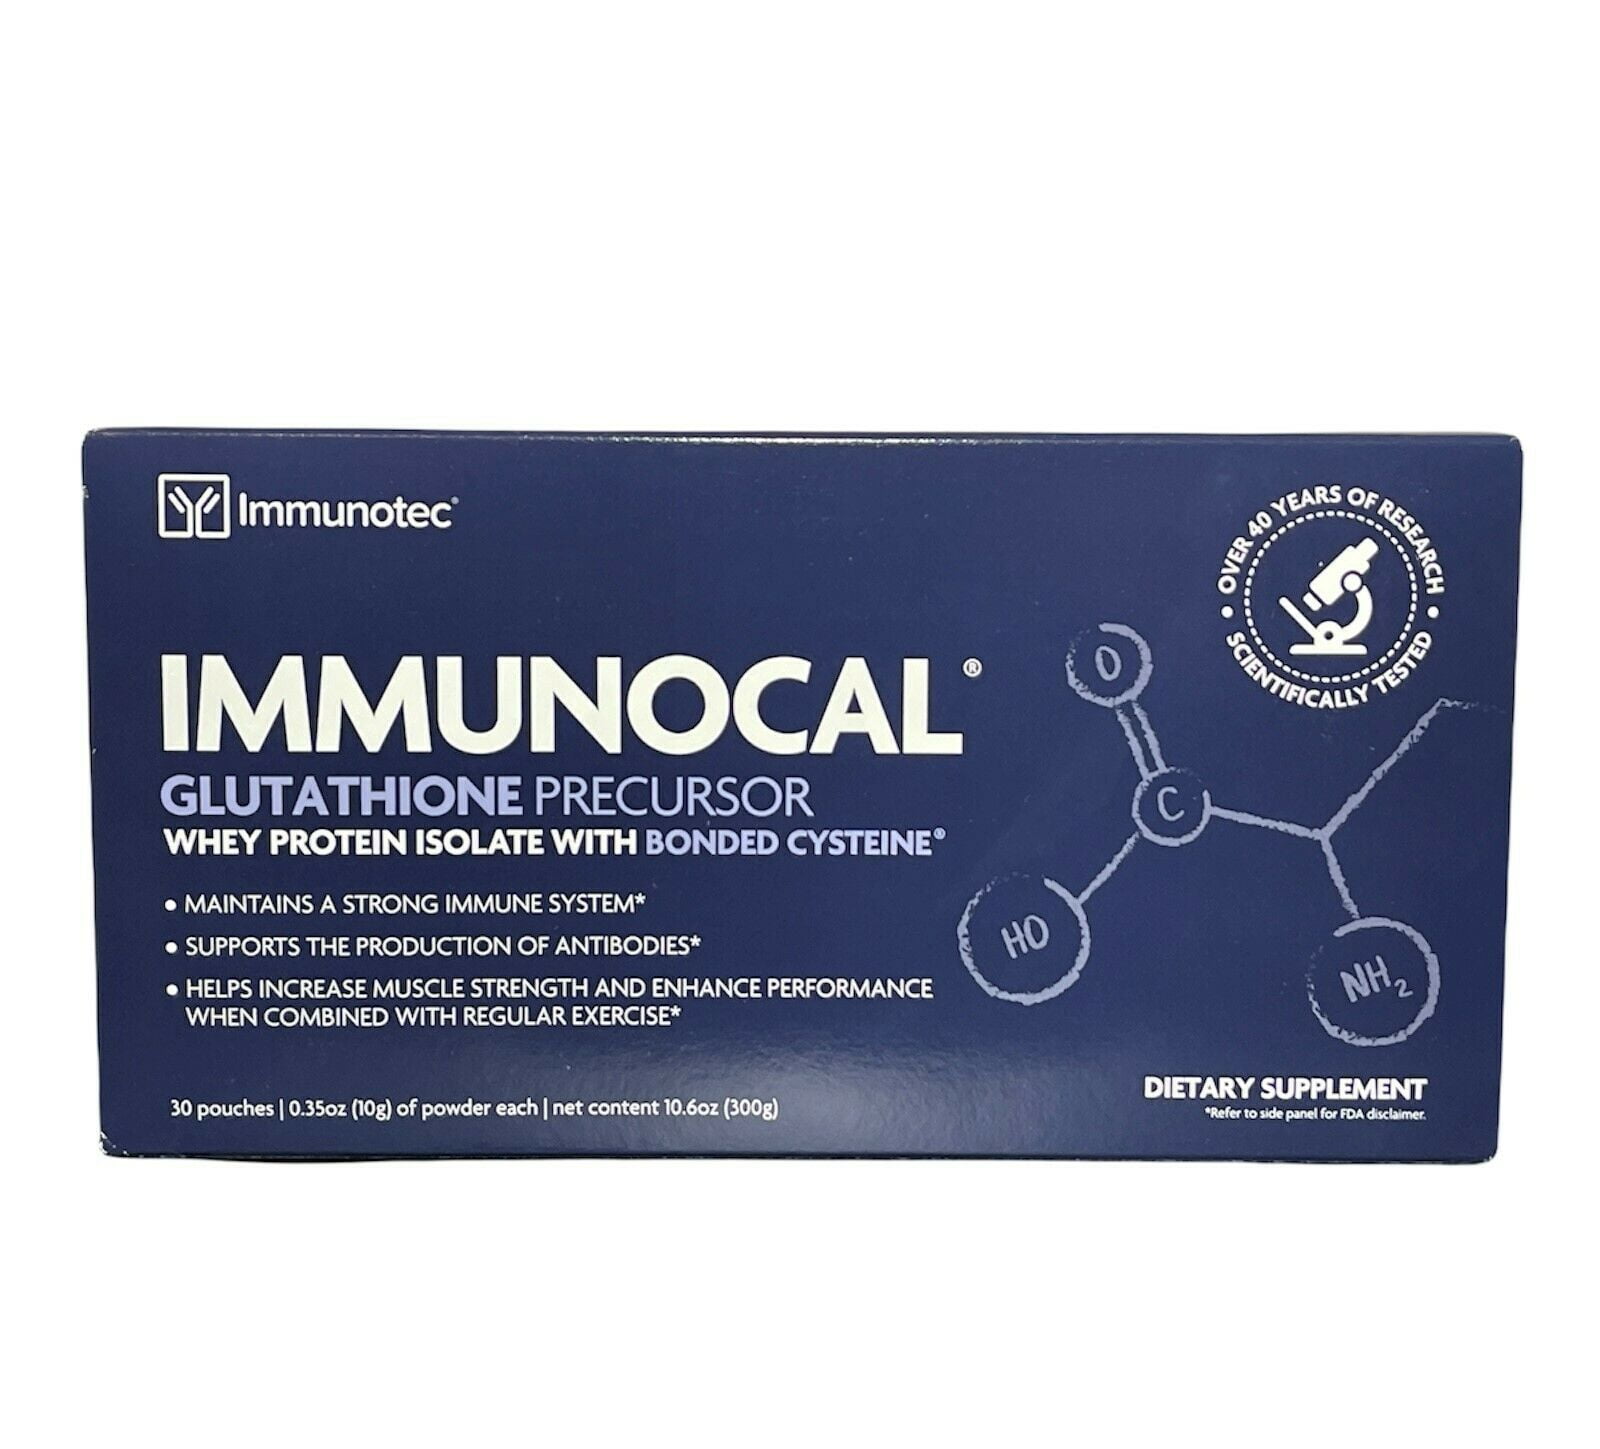 IMMUNOCAL 30 PK ** 2 Boxes ** Natural source of Glutathione as low as $76./box 